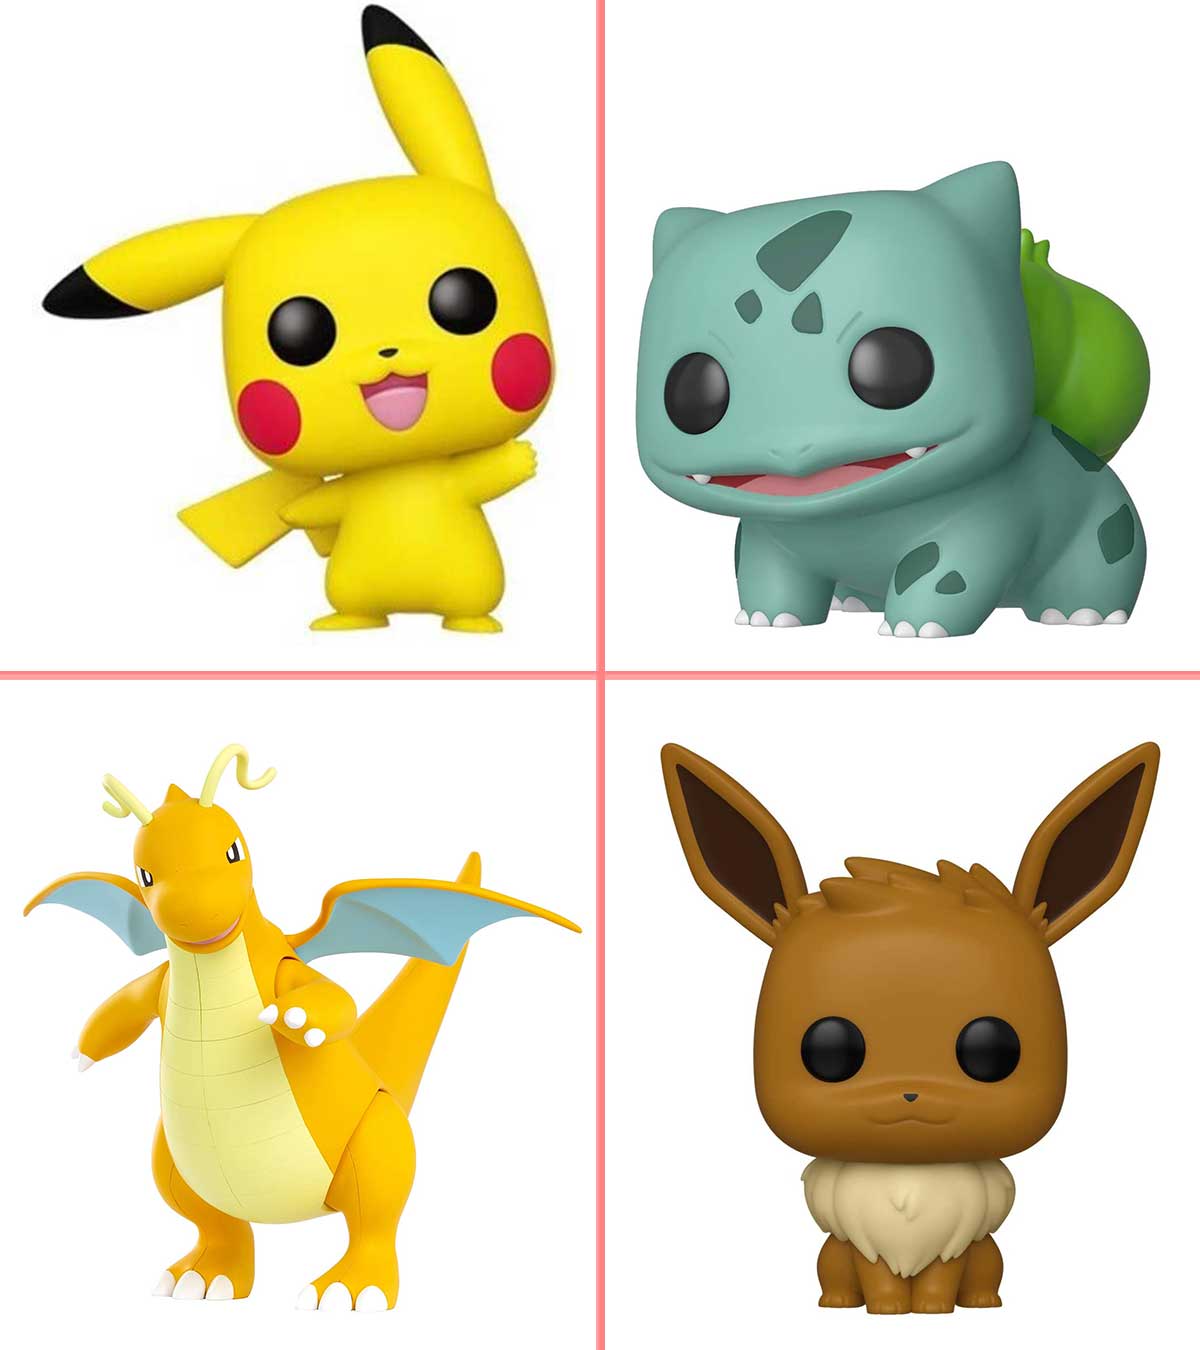 Find Fun, Creative pokemon ball toys and Toys For All 